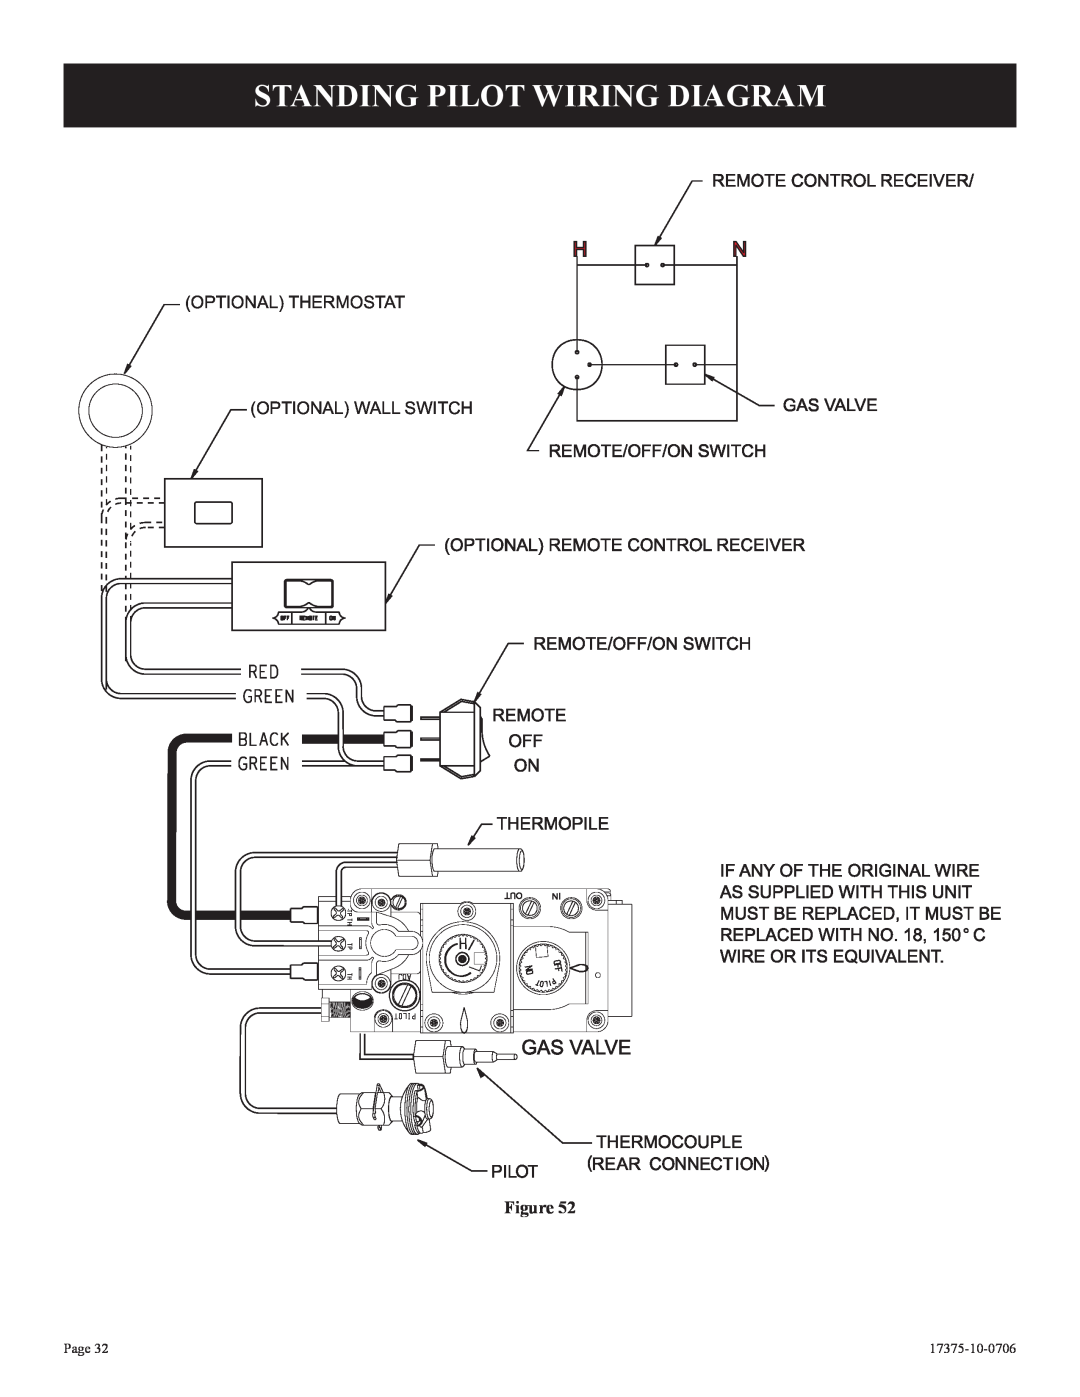 Empire Comfort Systems DVP42FP9(1,3)(N,P)-1 Standing Pilot Wiring Diagram, Optional Thermostat Optional Wall Switch 